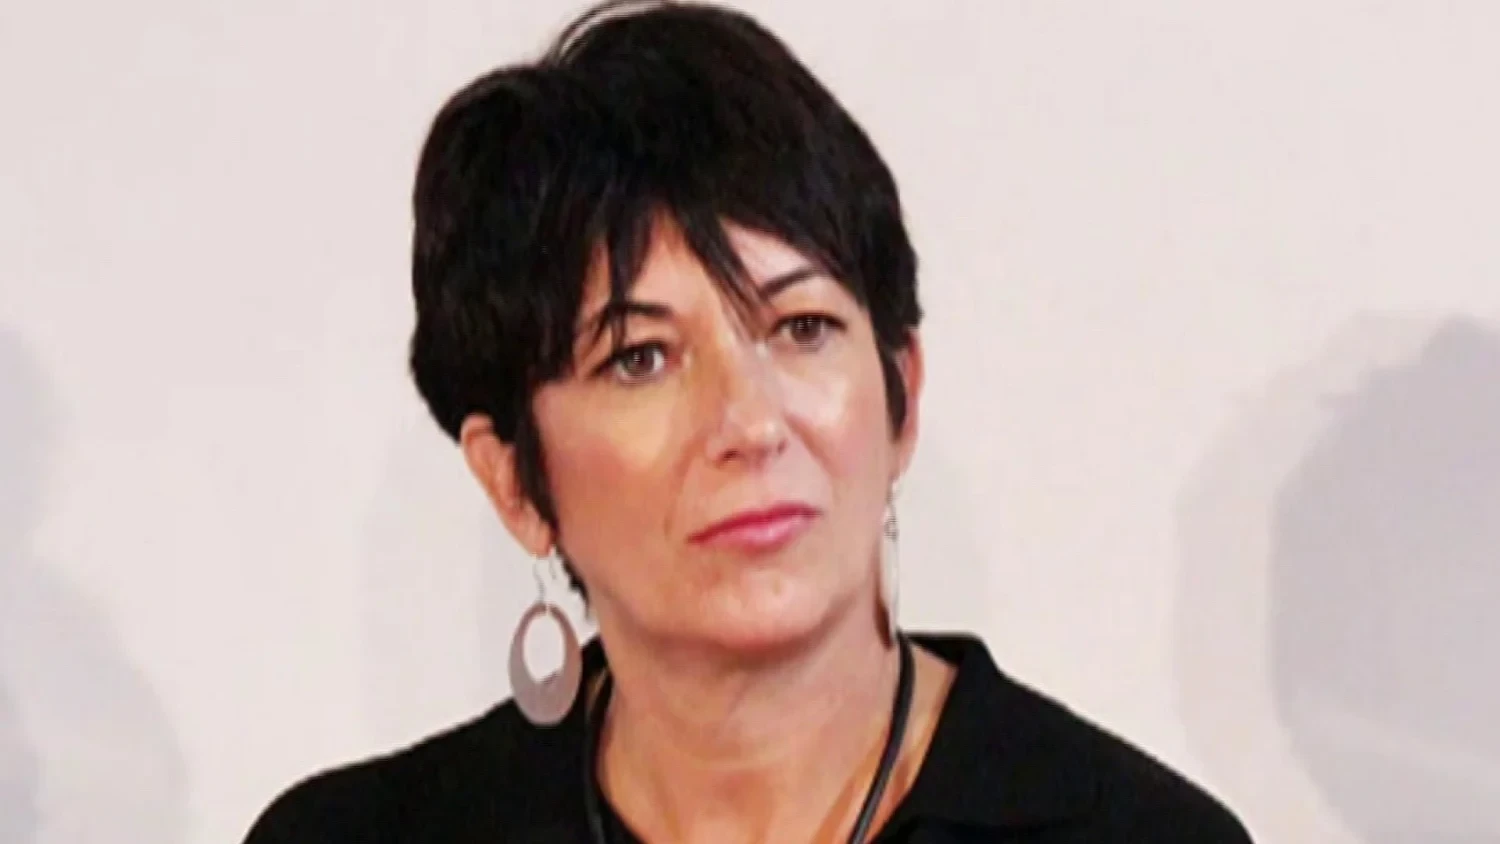 Convicted sex trafficker, Ghislaine Maxwell moved to low-security federal prison in Florida where she can take part in inmate talent show